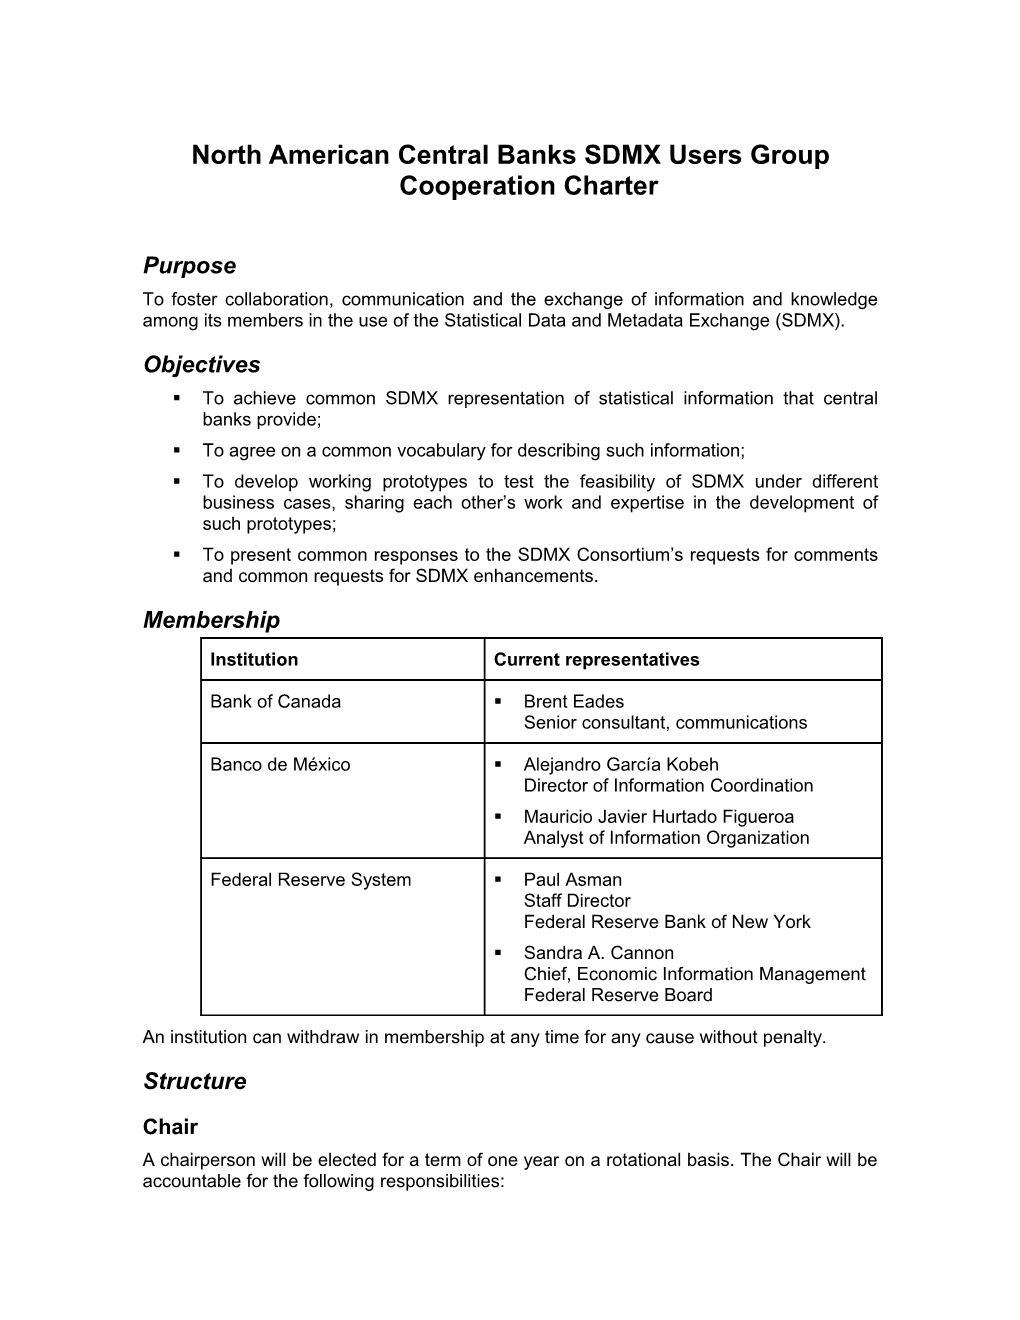 Charter Ofr the North America Central Banks SDMX User Group